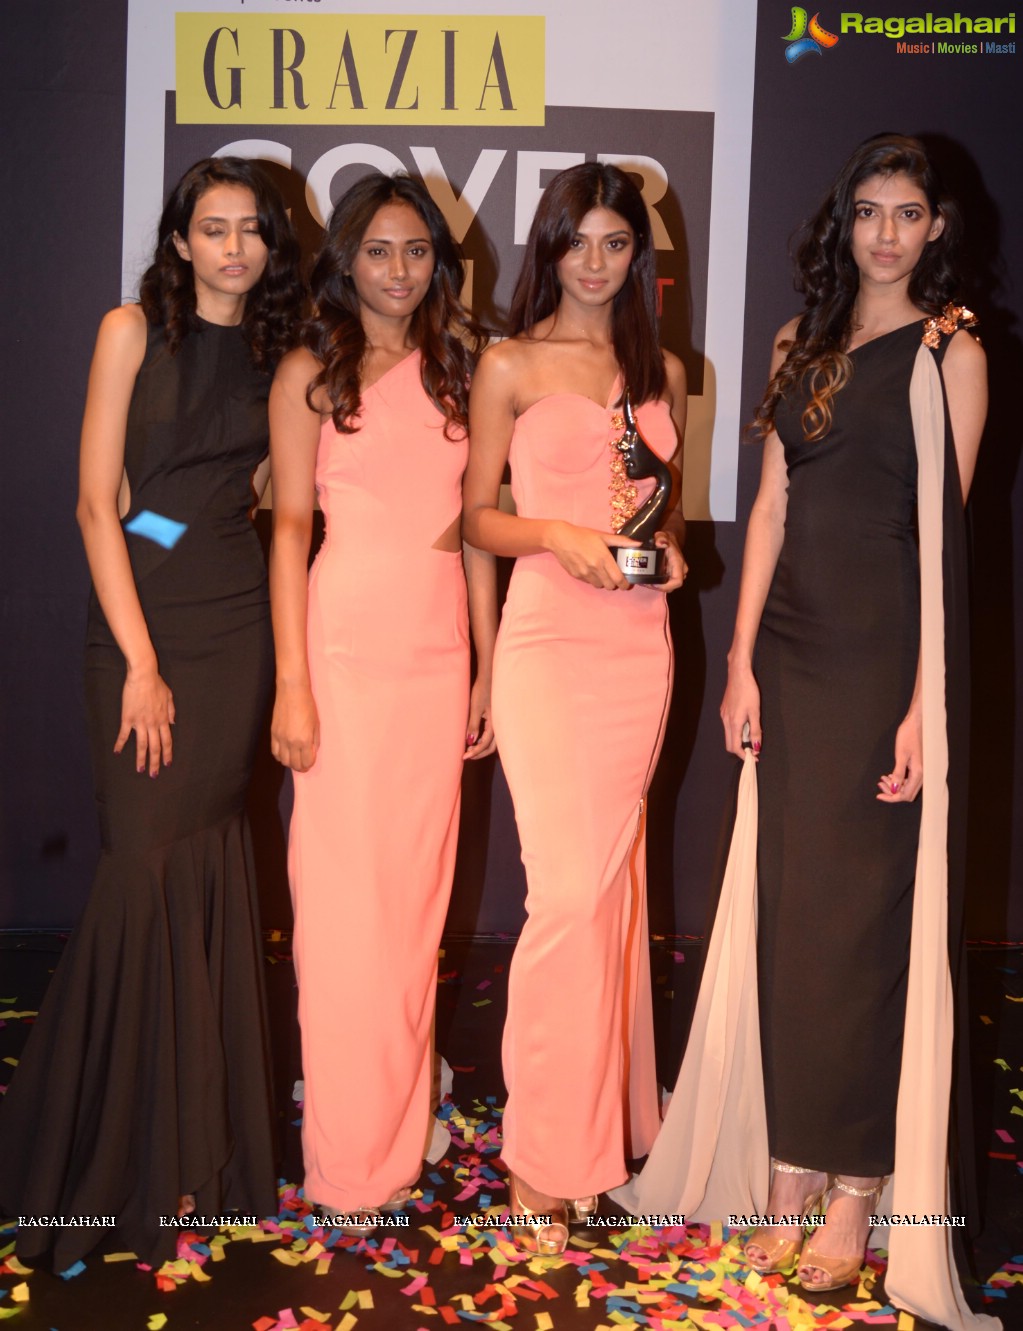 Celebs & Grazia Cover Girl Hunt winners at the Finale Event